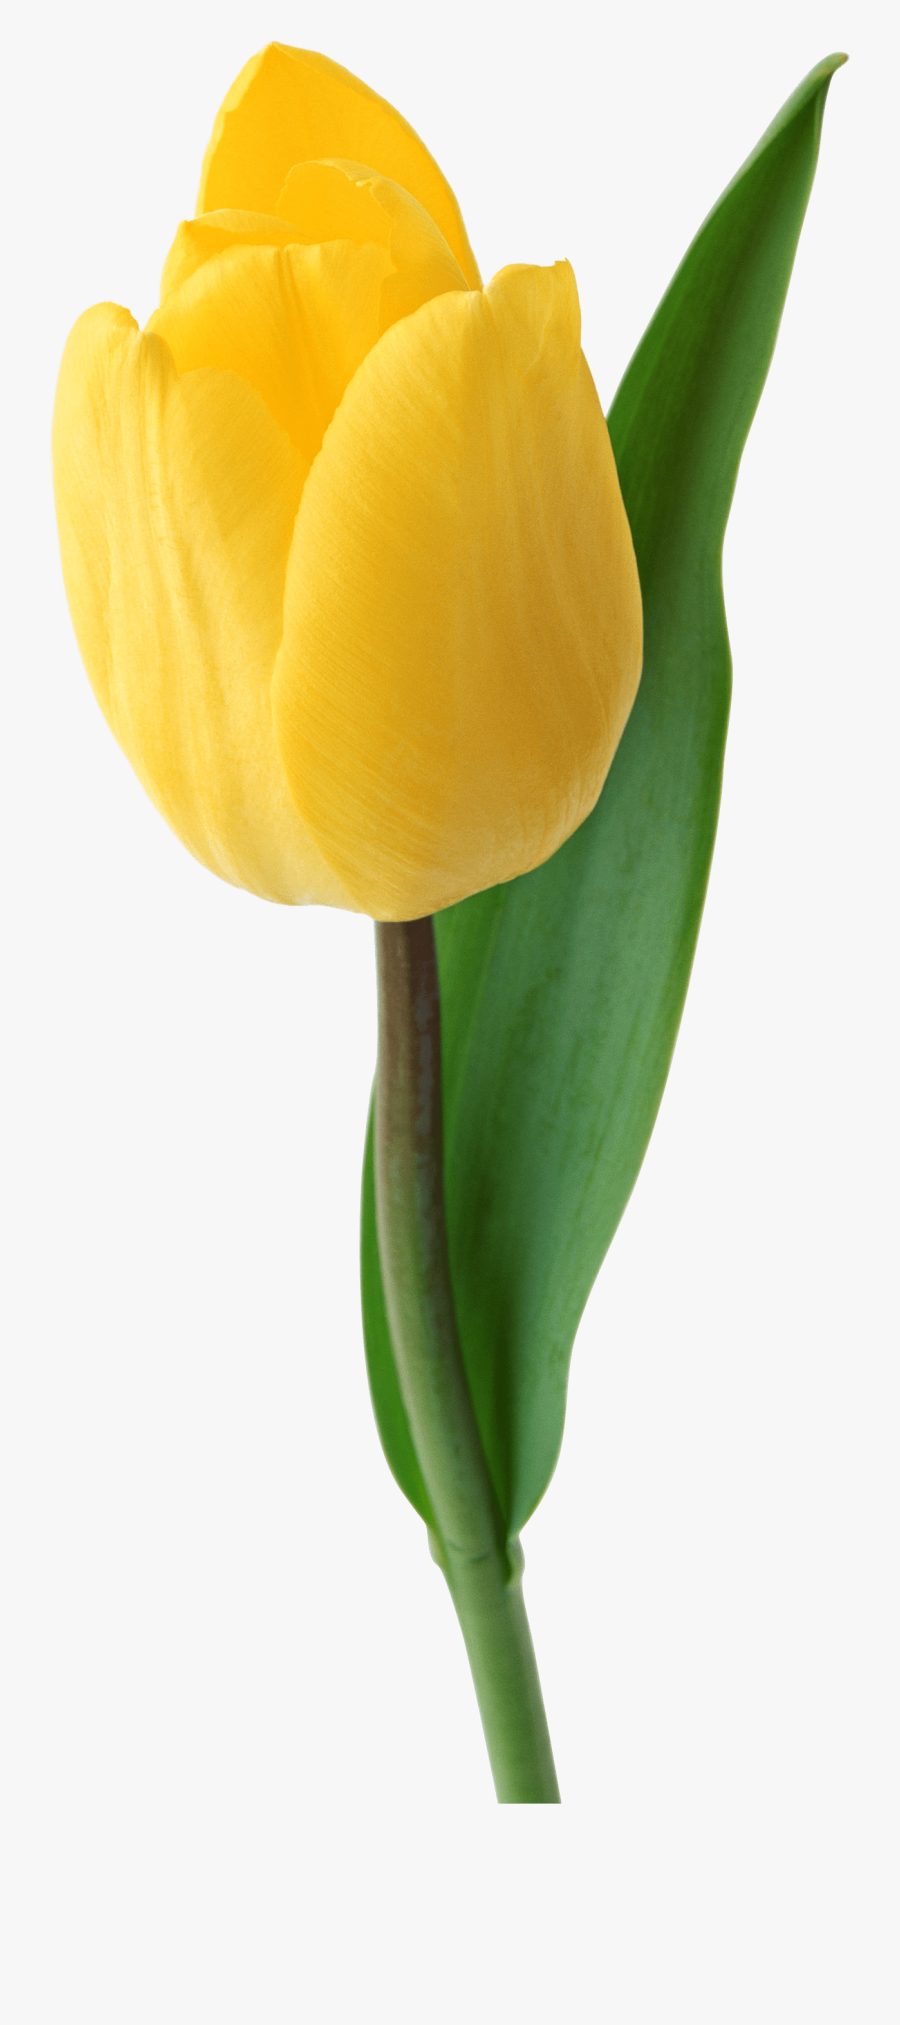 Yellow Tulip Flower Png, Transparent Clipart